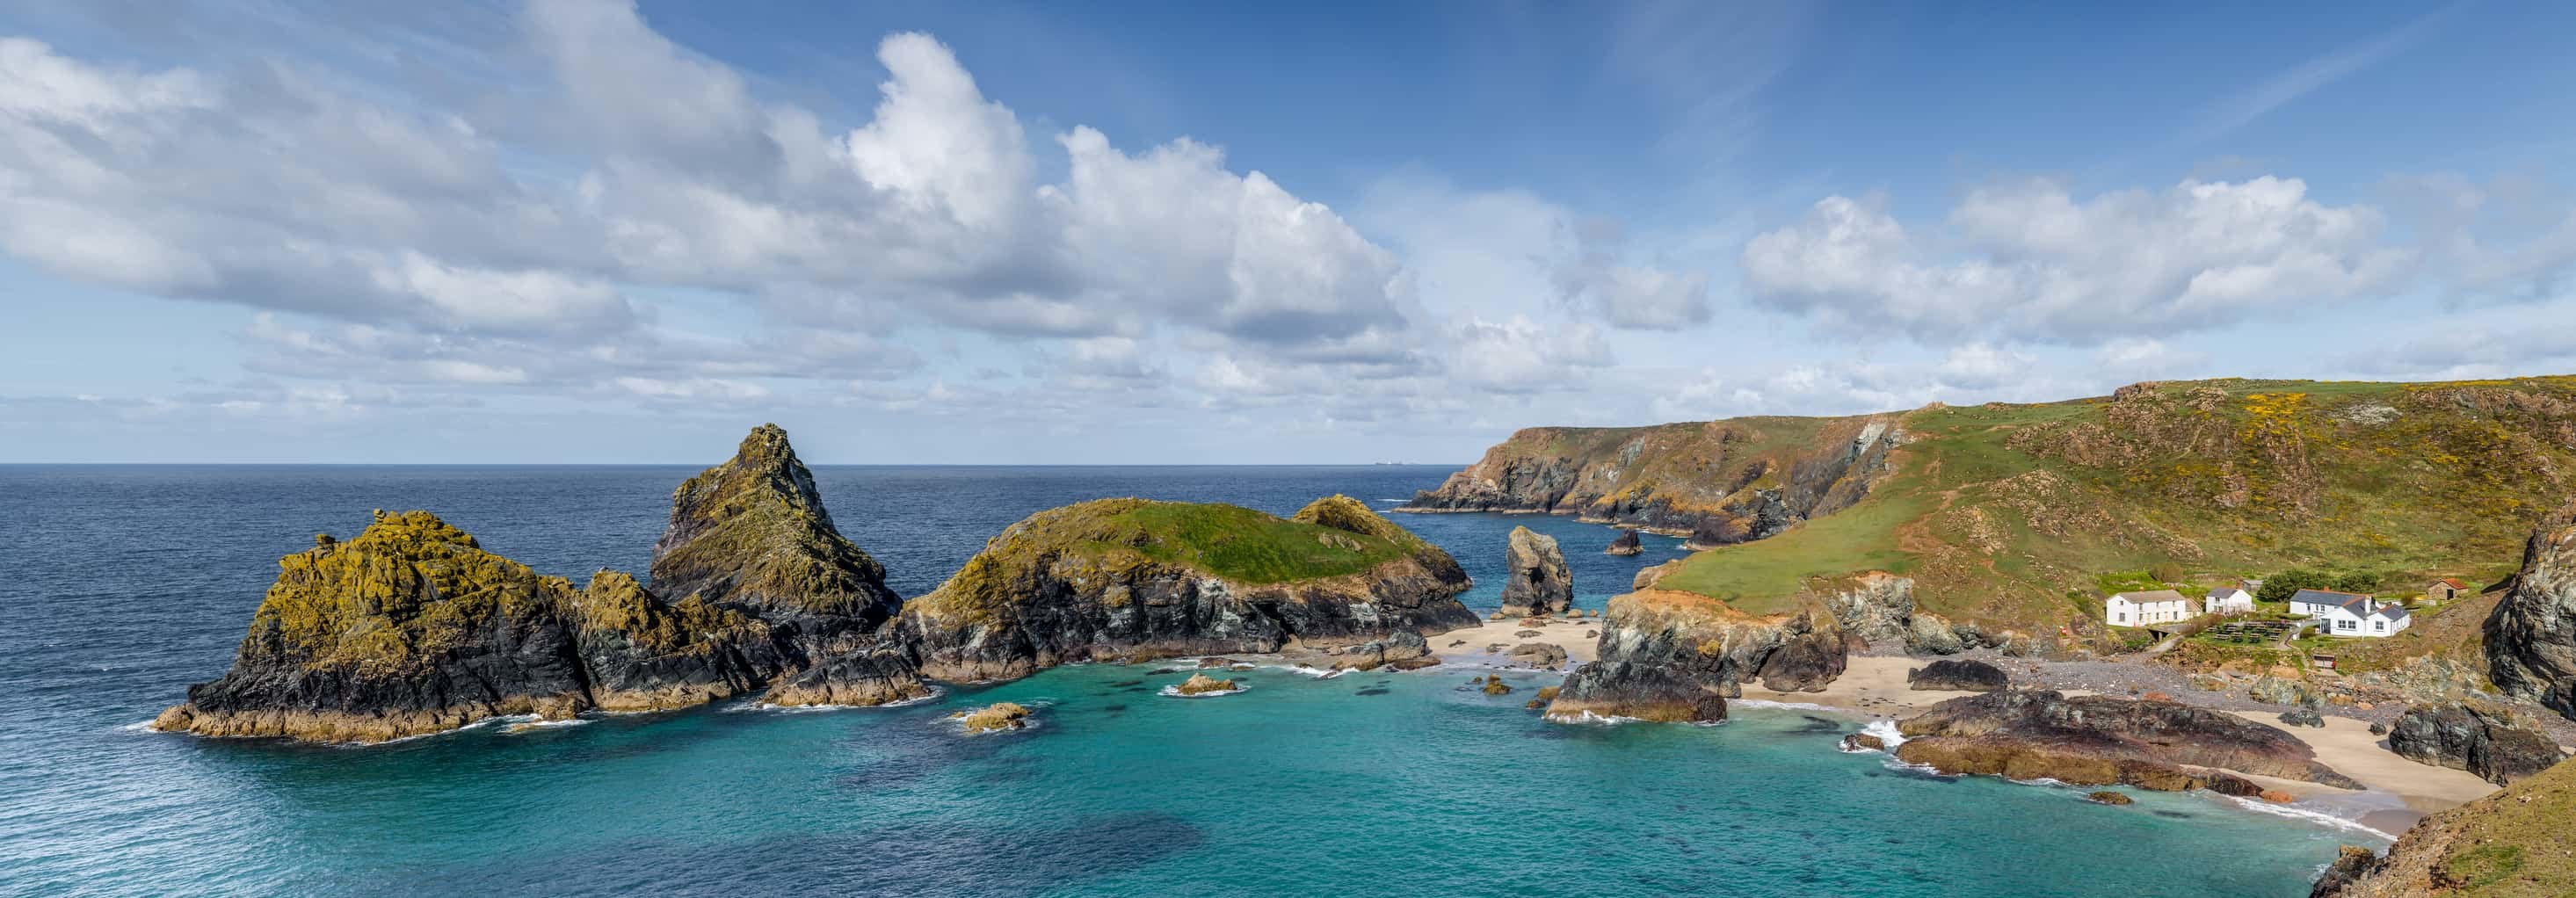 Panoramic photograph of a beautiful Spring day on the west coast of Cornwall at Kynance Cove. UK